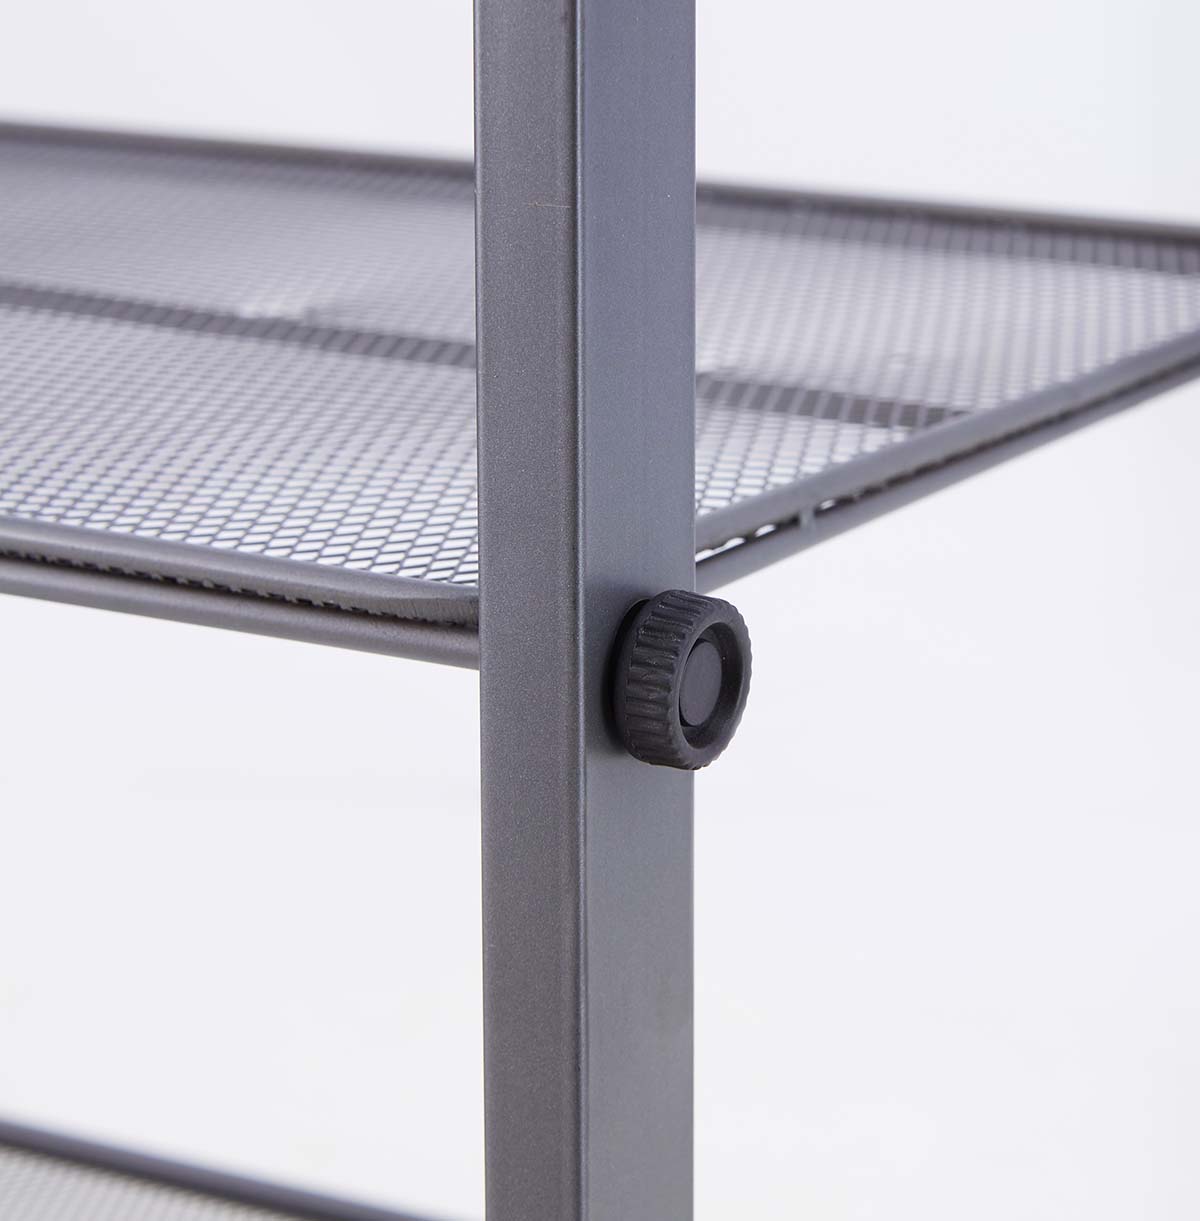 stainless steel table with wire shelf